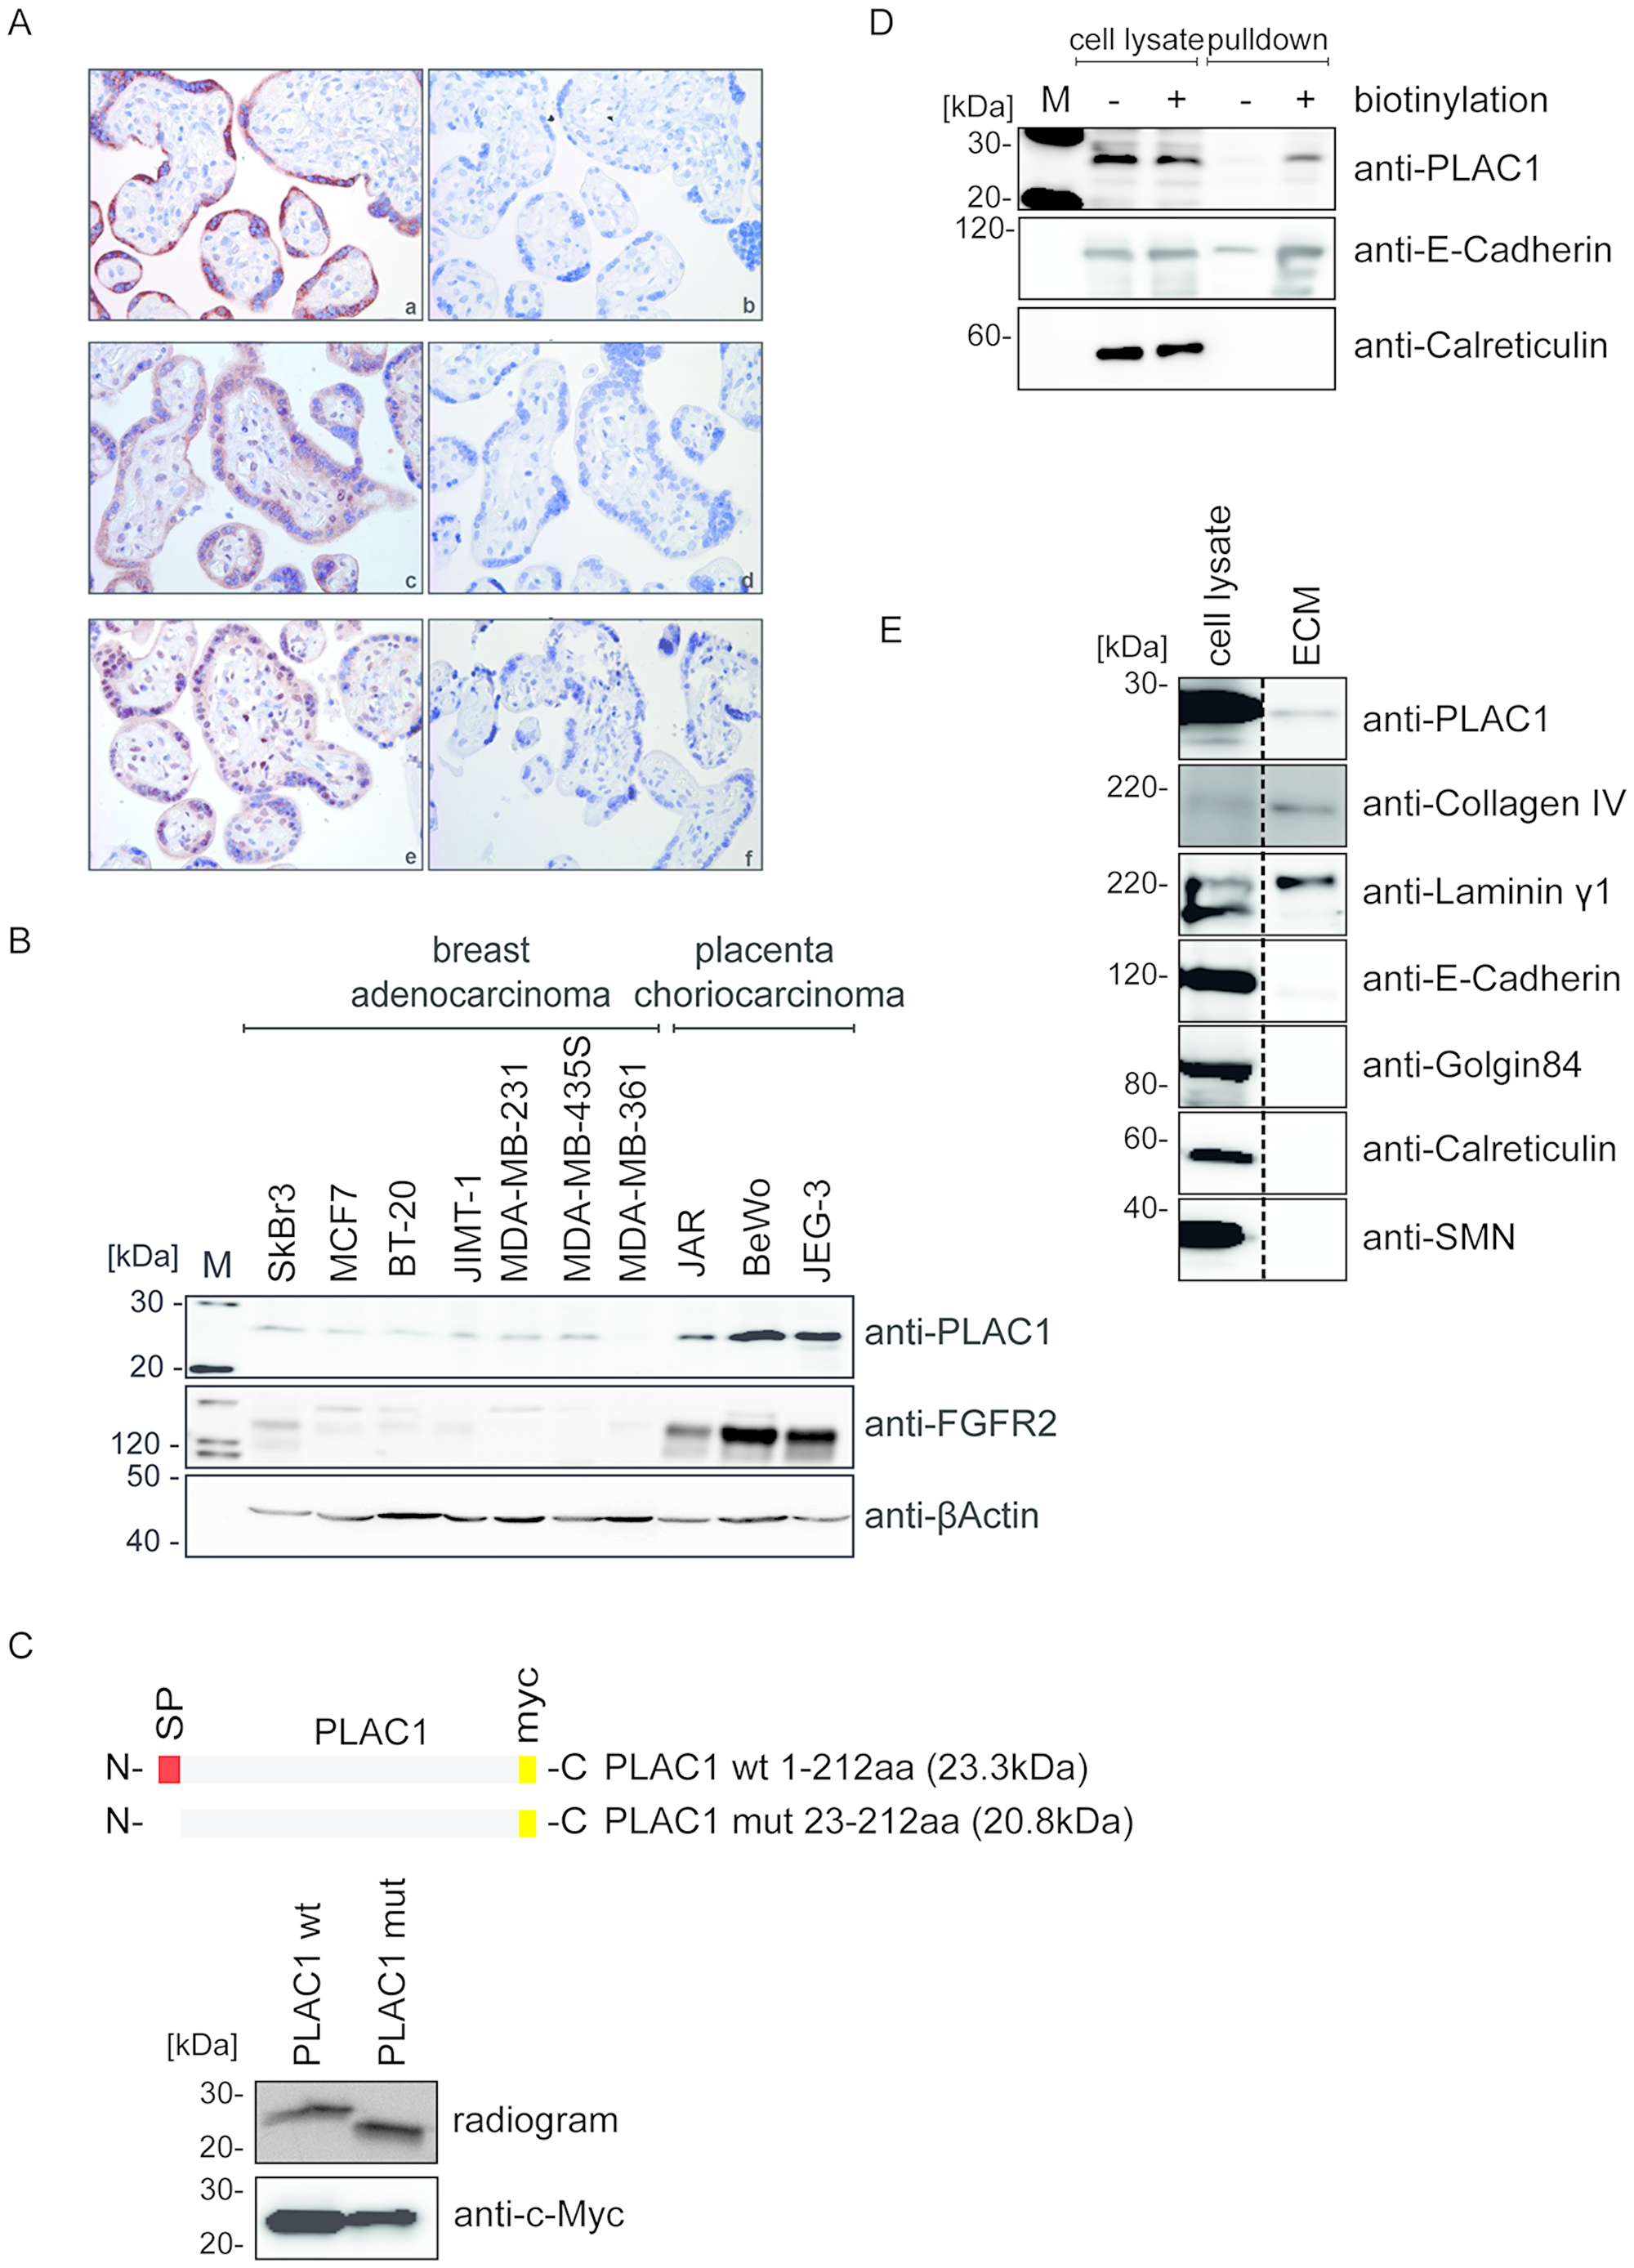 PLAC1 is co-expressed with FGF7 and FGFR2 in placenta and human cancer cells and is released into the ECM.